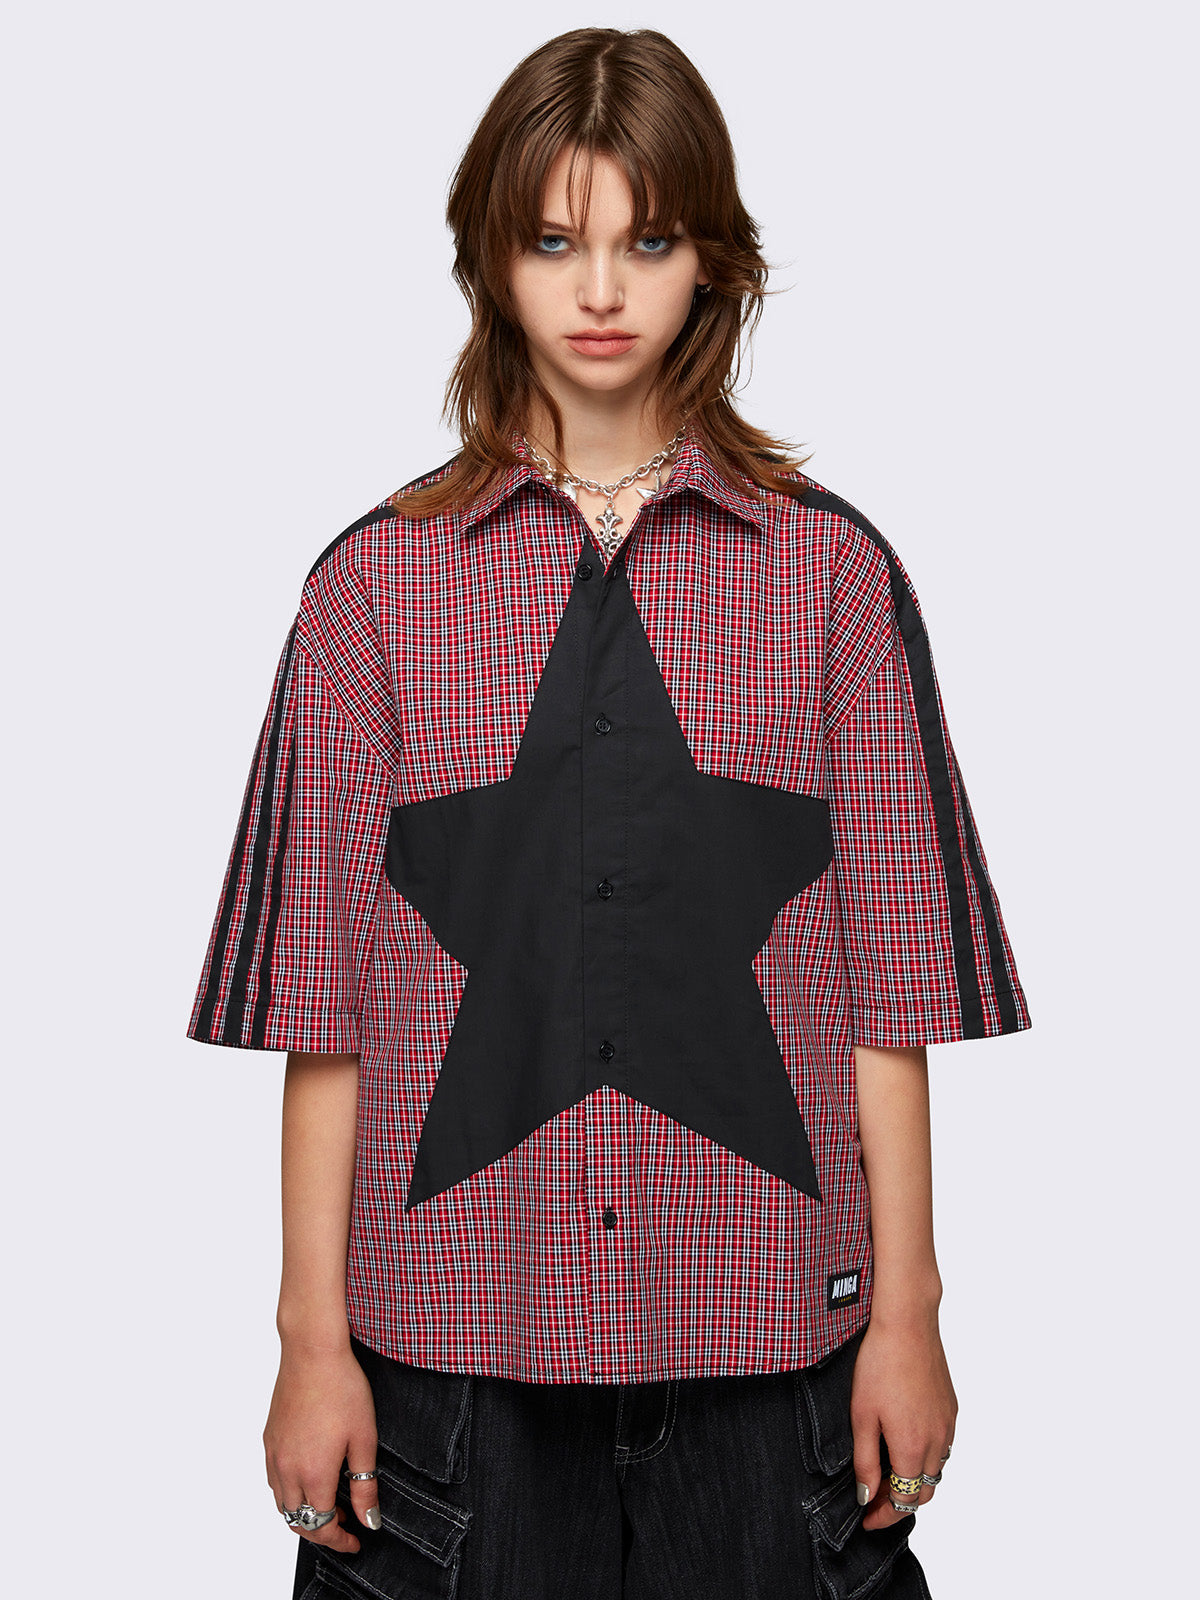 Checkered shirt in red with black star patch